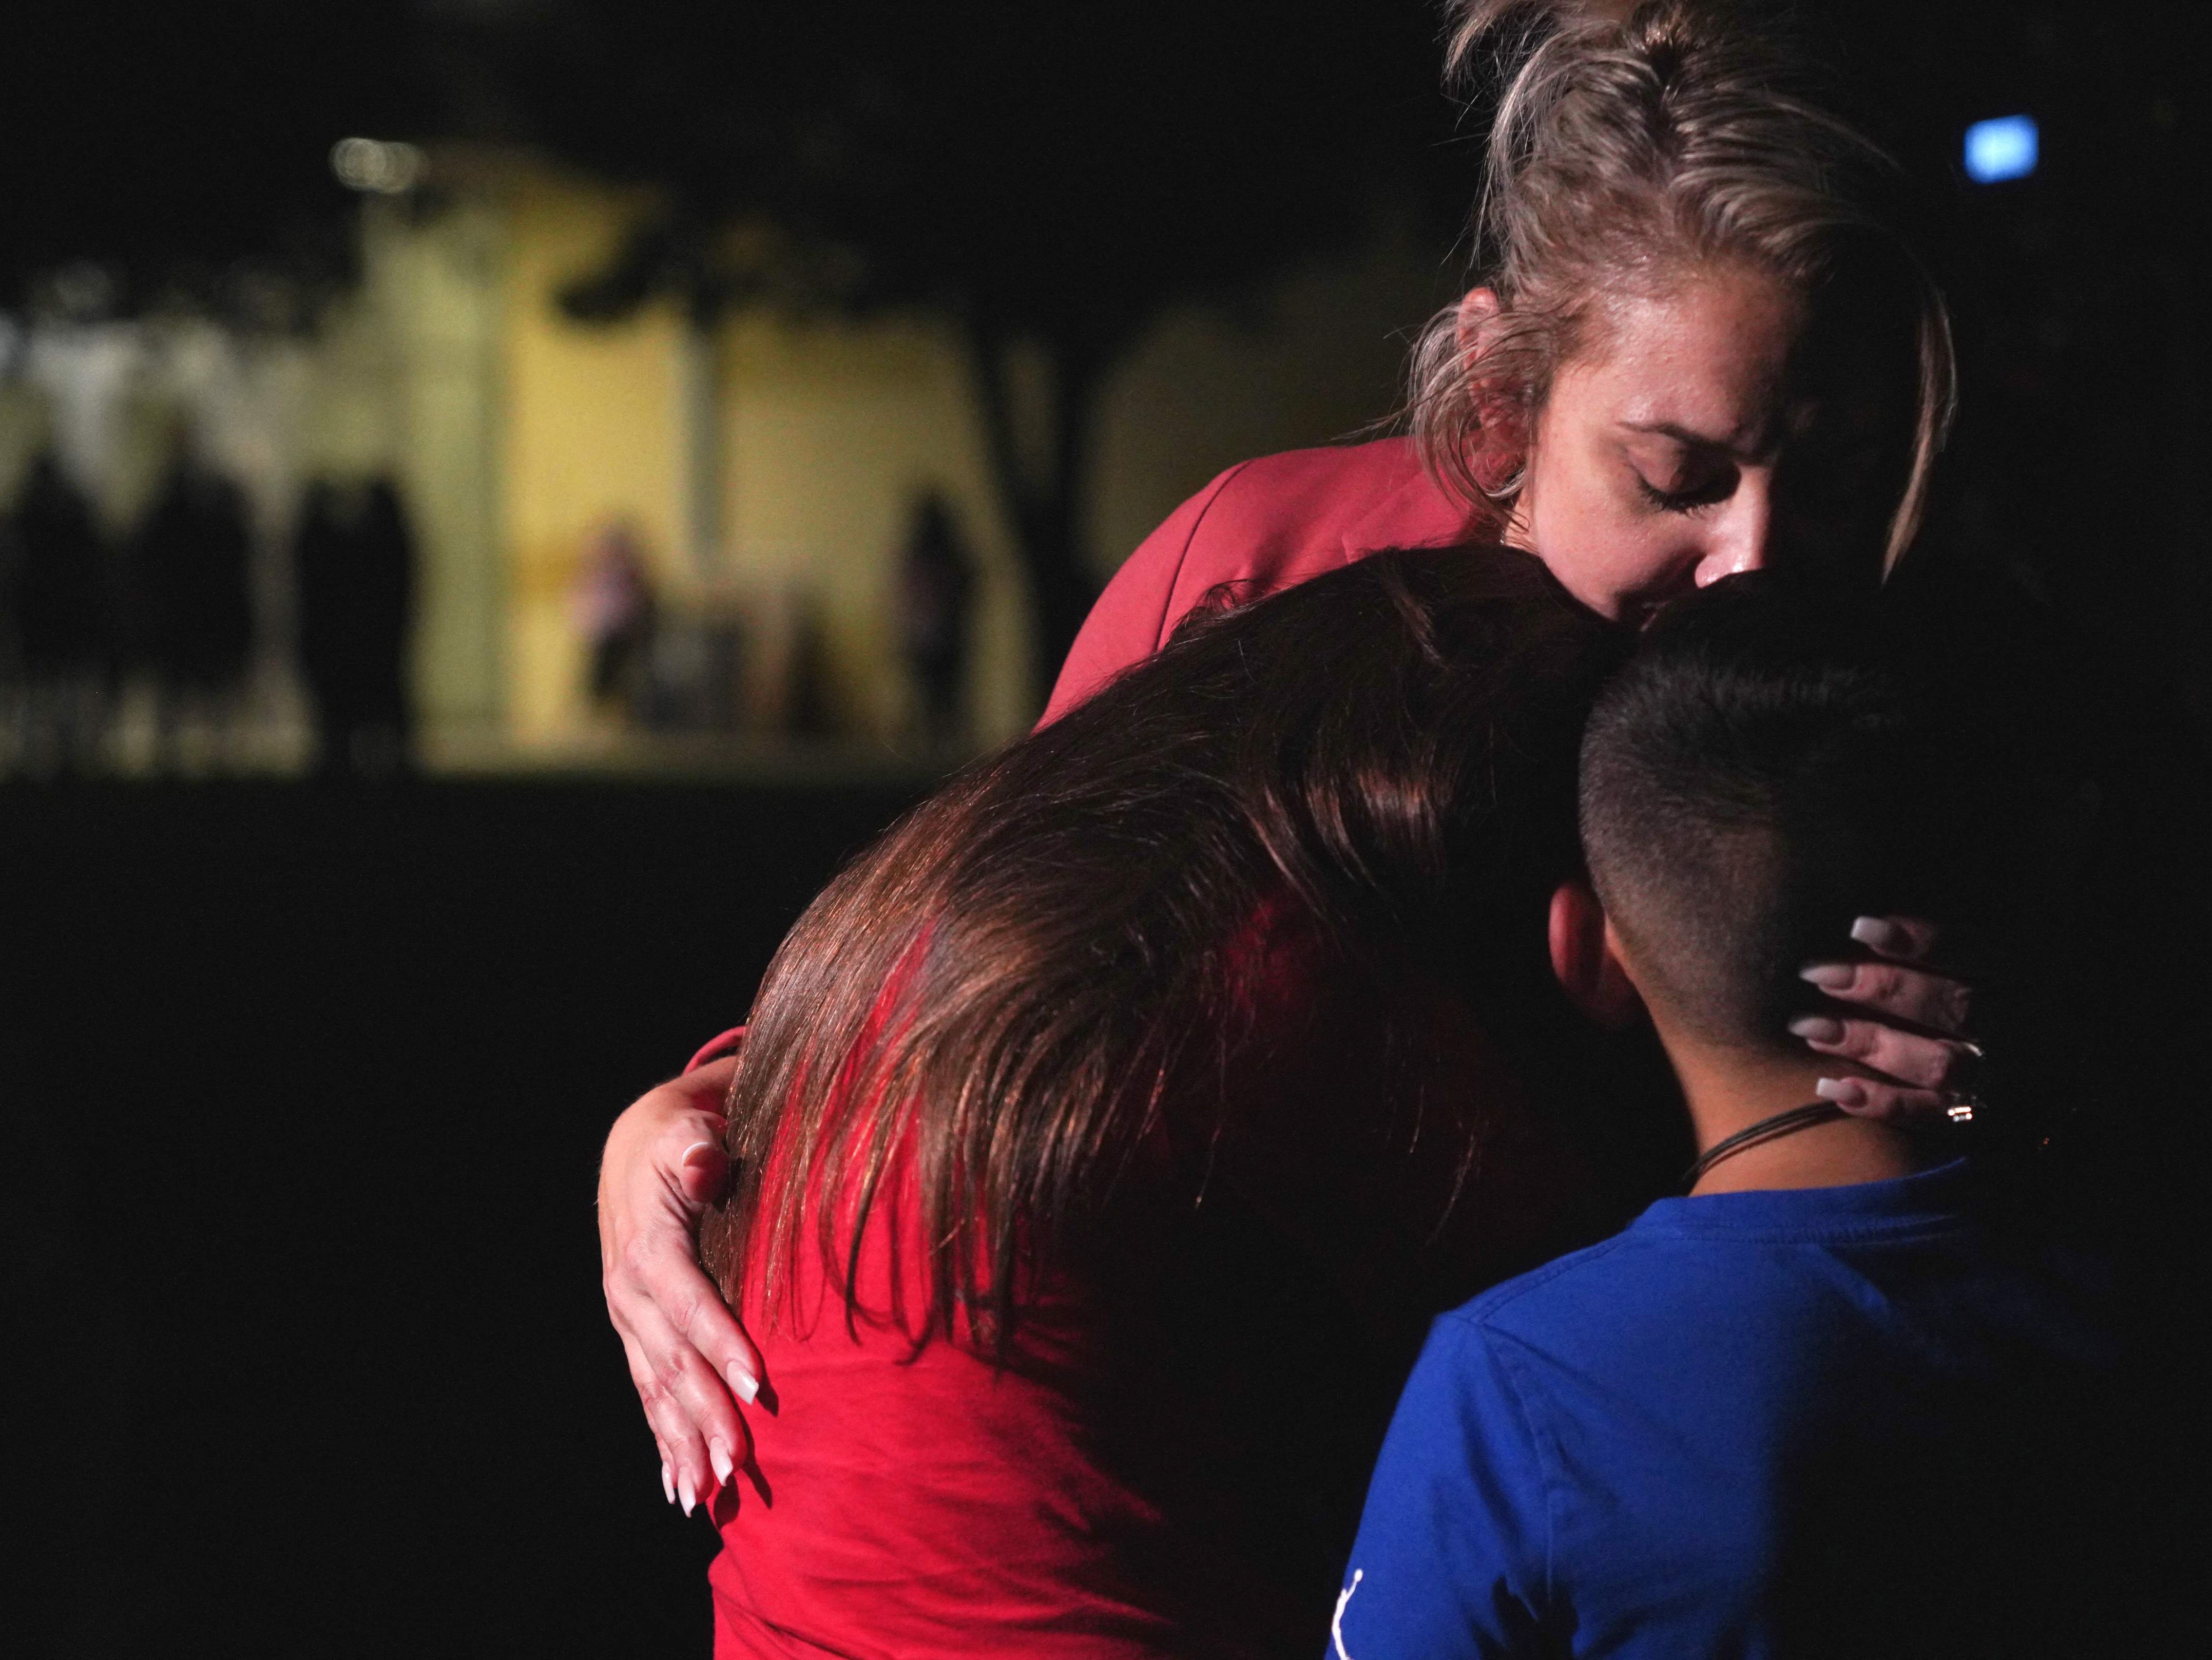 Families hug outside a centre where grief counseling will be offered in Uvalde following a school shooting